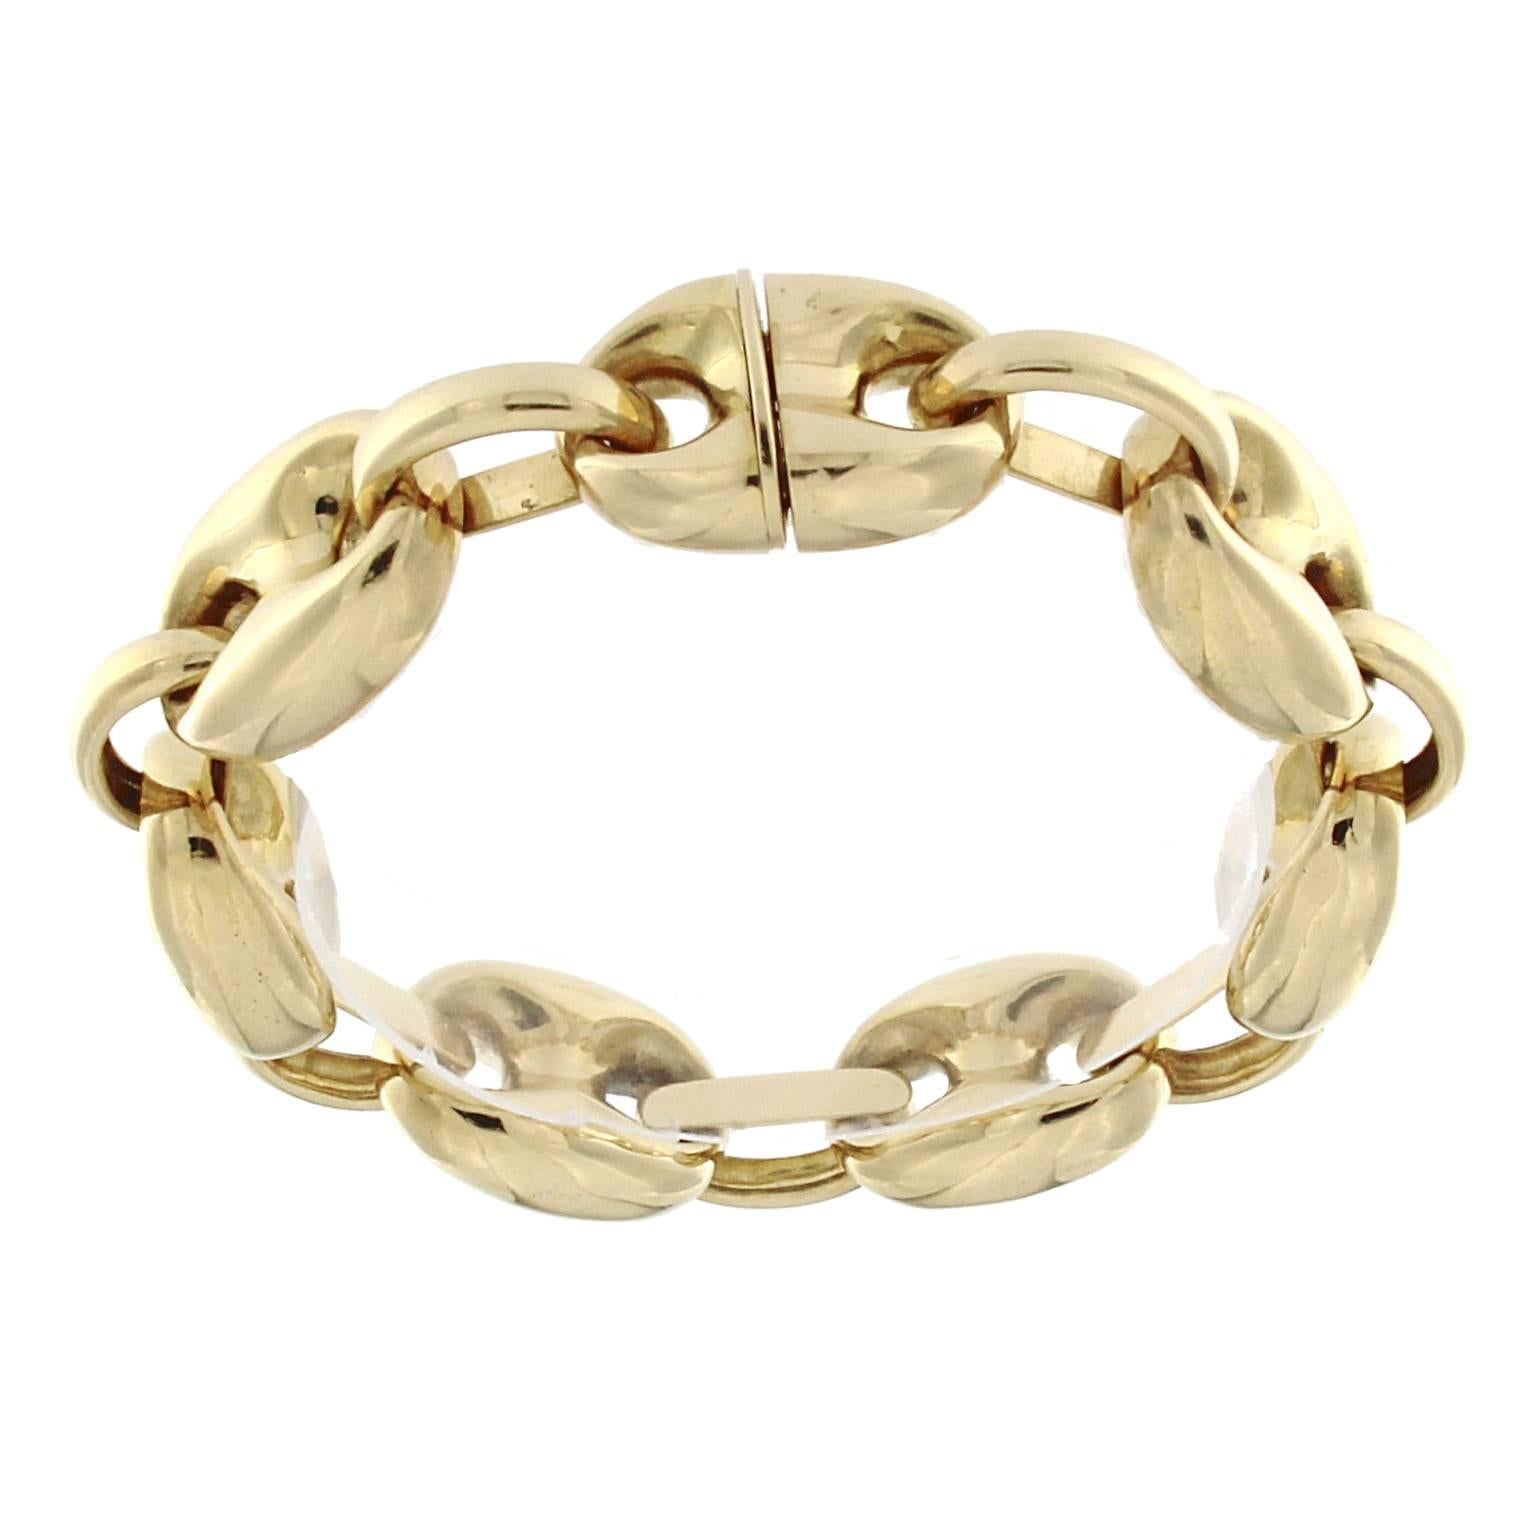 Great classic The bracelet with the marine and classic sea-link 
The total weight of the gold is GR 50.80

Stamp 750 10 MI 



